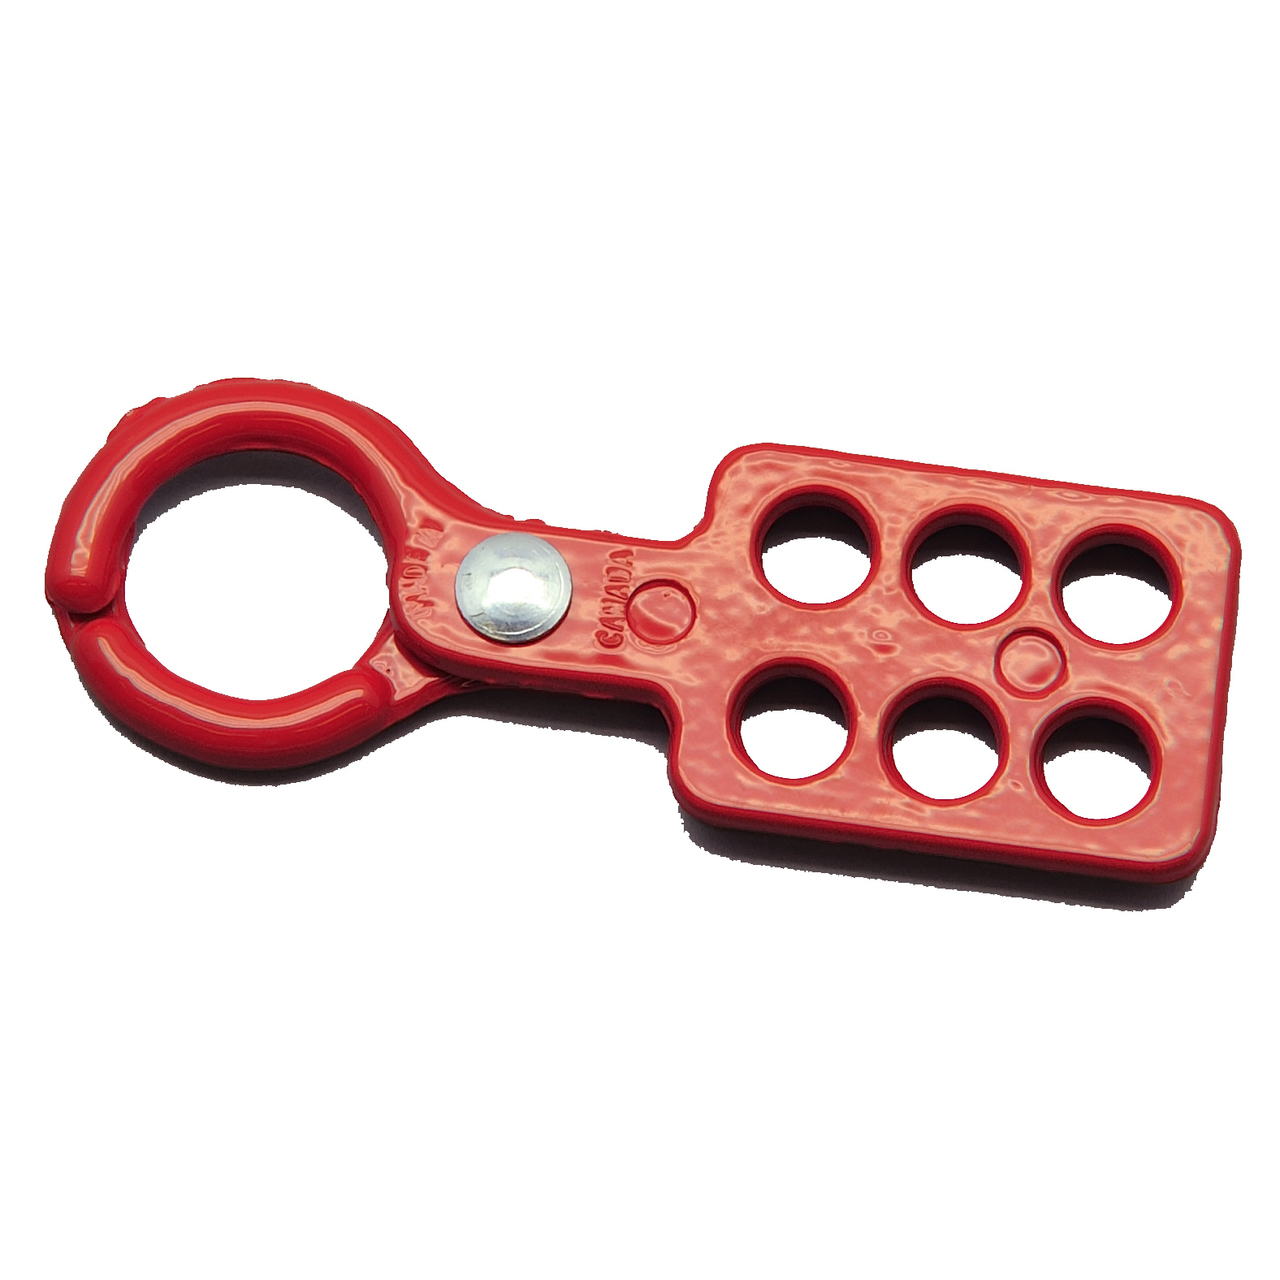 ZING RecycLockout Lockout Tagout Hasp, 1 Inch Recycled Aluminum